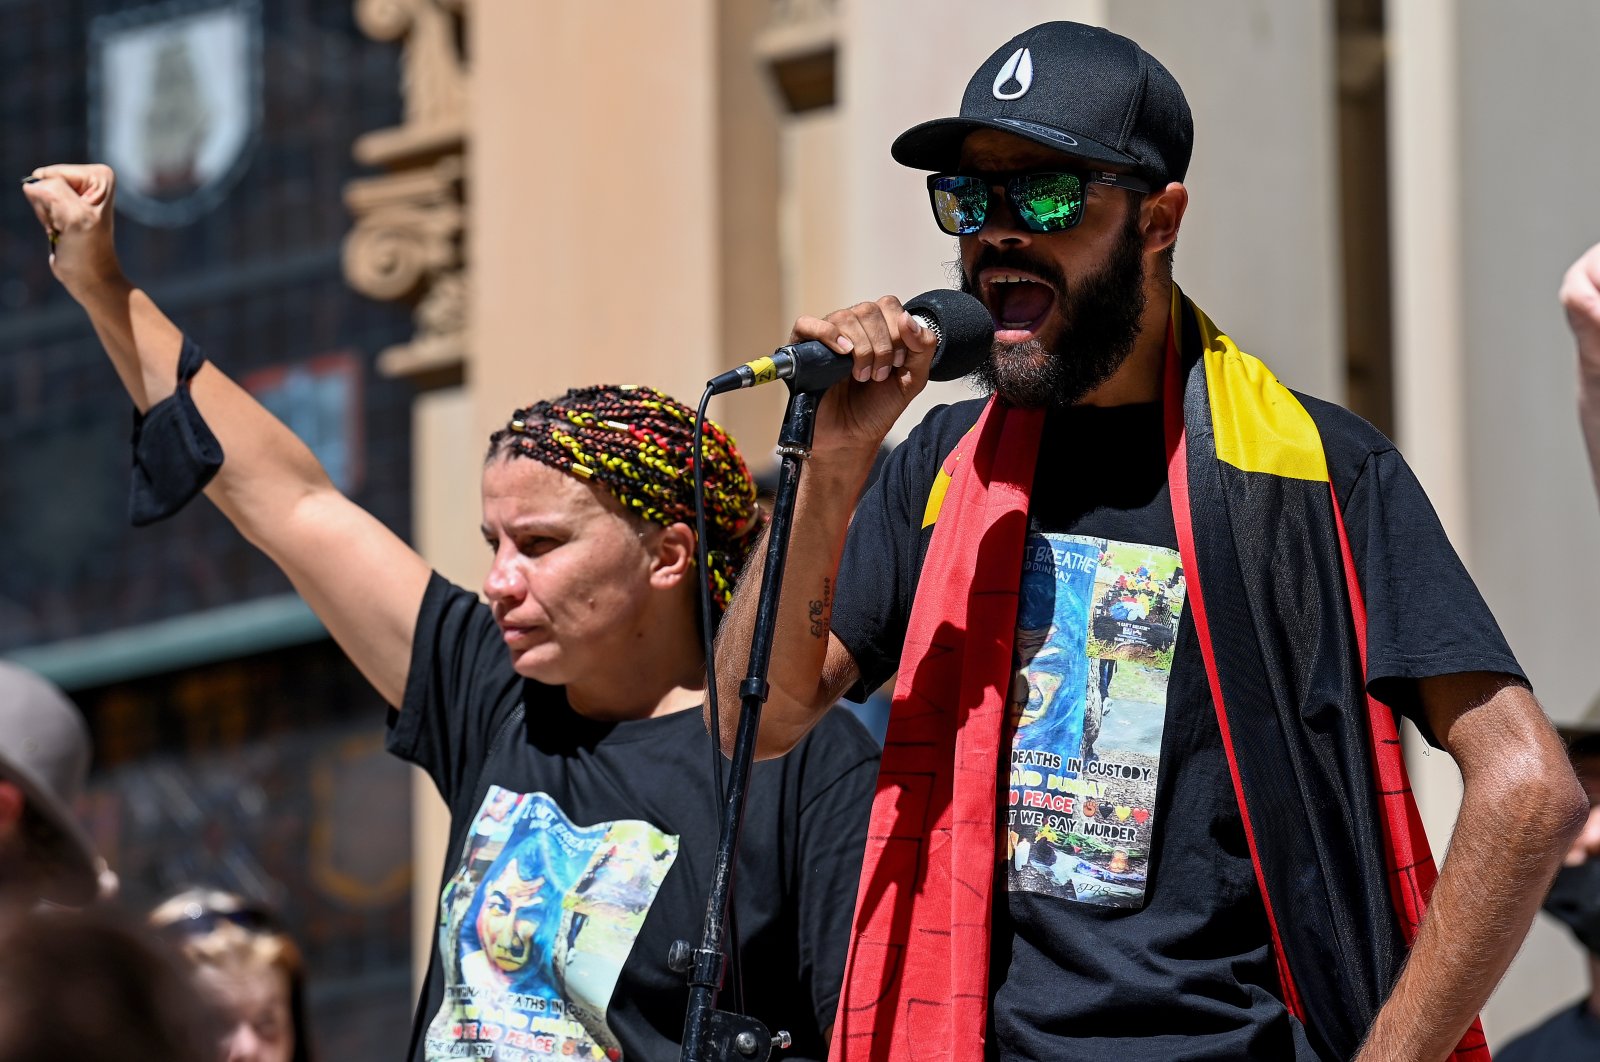 Indigenous activist and proud Dunghutti, Gumbaynggirr, Bundjalung woman Lizzy Jarret (L) and Paul Silva (R), a nephew of David Dungay Jr., speak during a rally on Australia Day. Australia&#039;s Indigenous peoples see the day marking the beginning of the colonization of their people and land and refer to it as &quot;Invasion Day,&quot; Sydney, Australia, Jan. 26, 2022.  (EPA Photo)